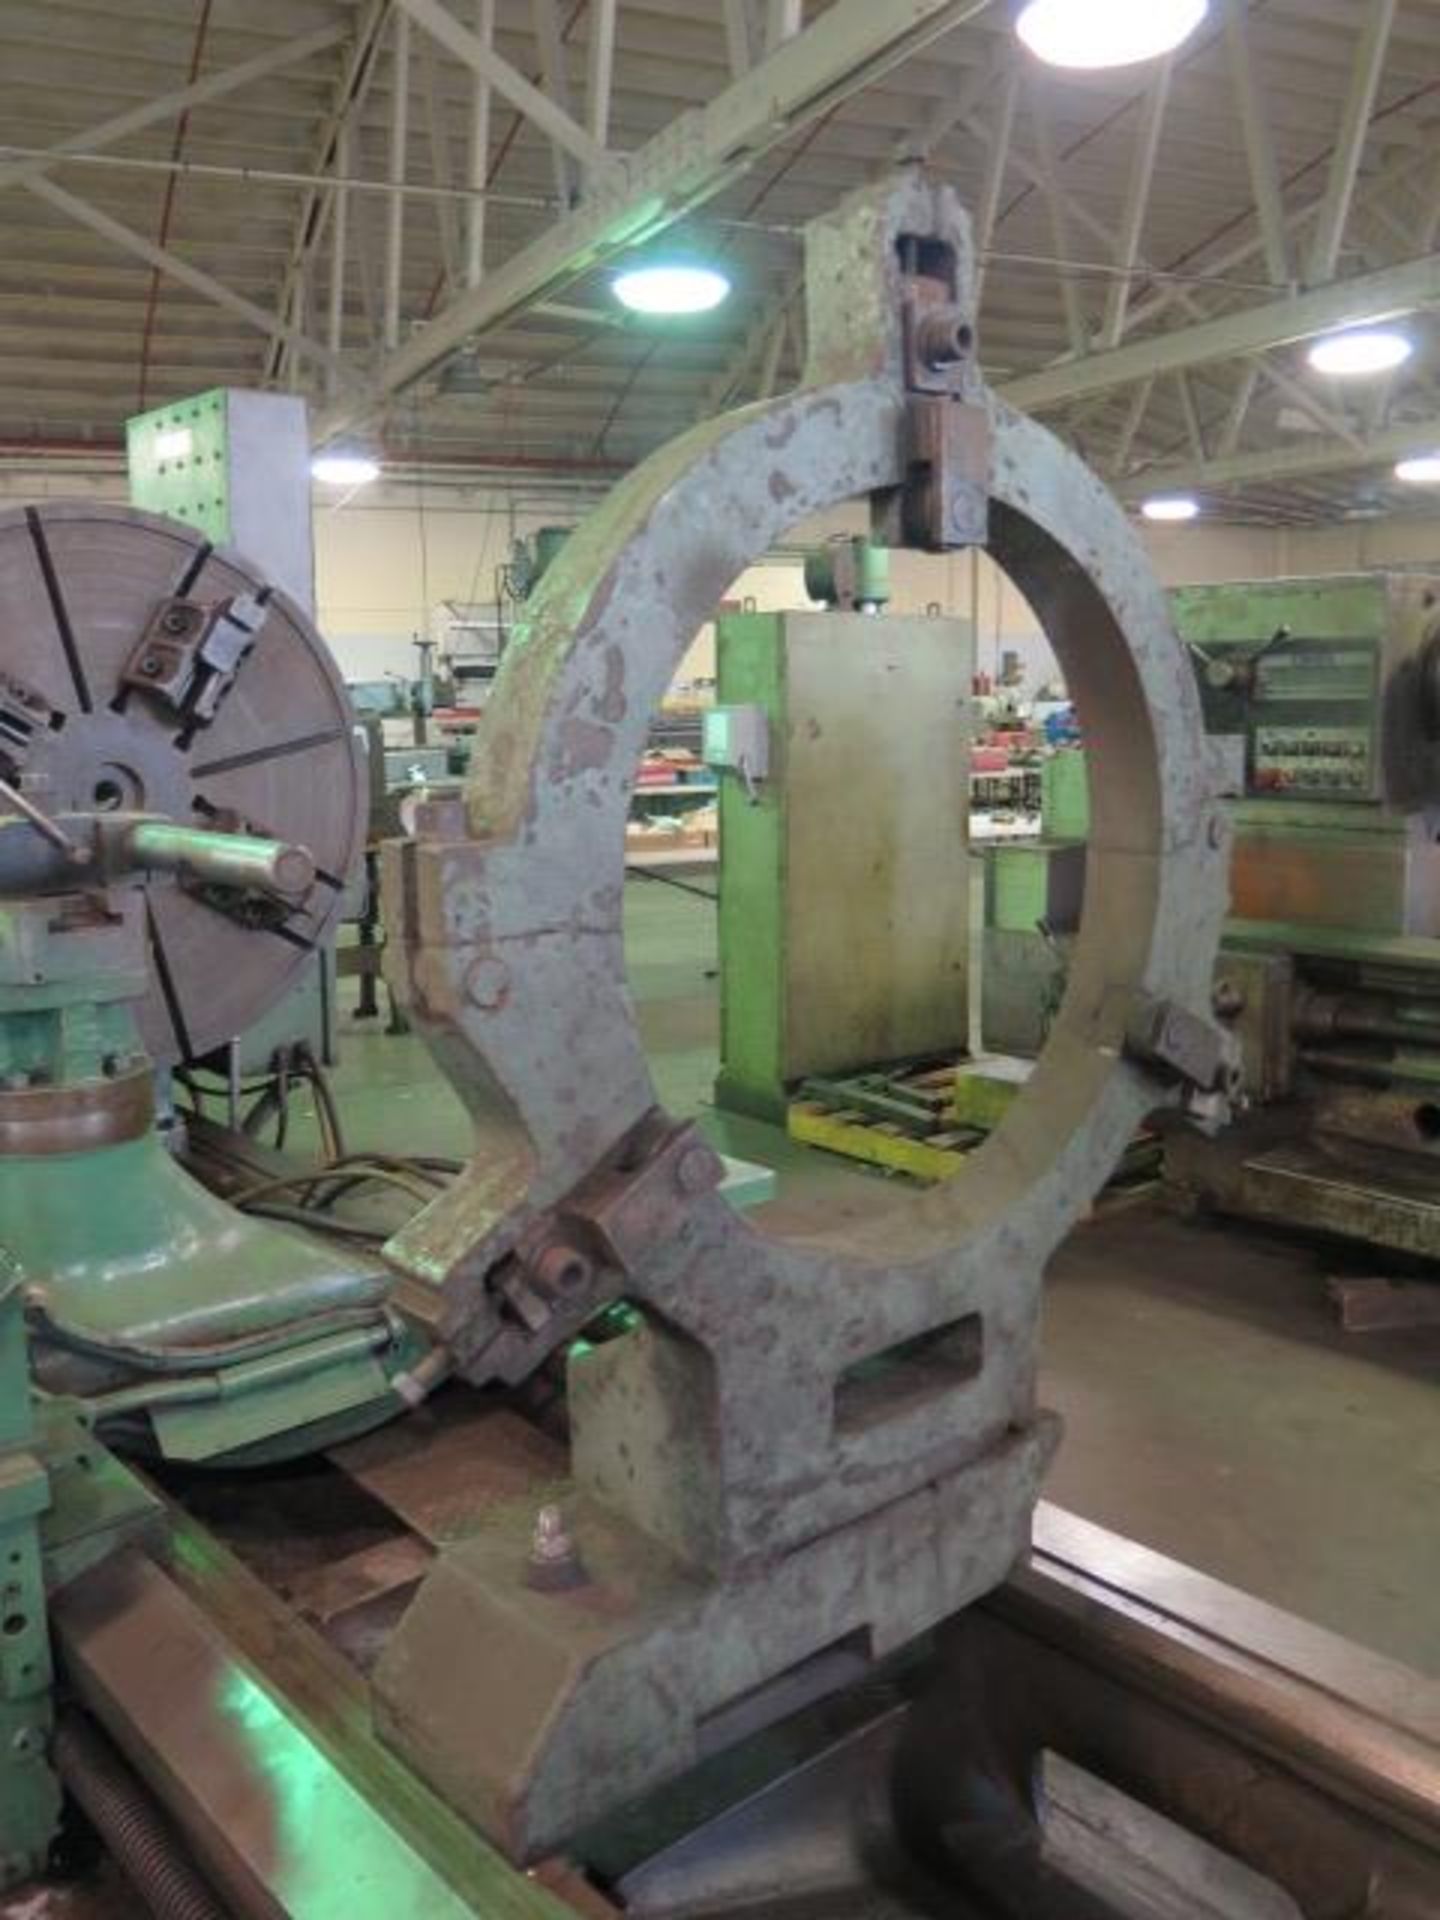 Niles A54P 62” x 140” Lathe s/n 23579 w/ 3.94-232 RPM, Inch Threading, Steady Rest, SOLD AS IS - Image 16 of 20